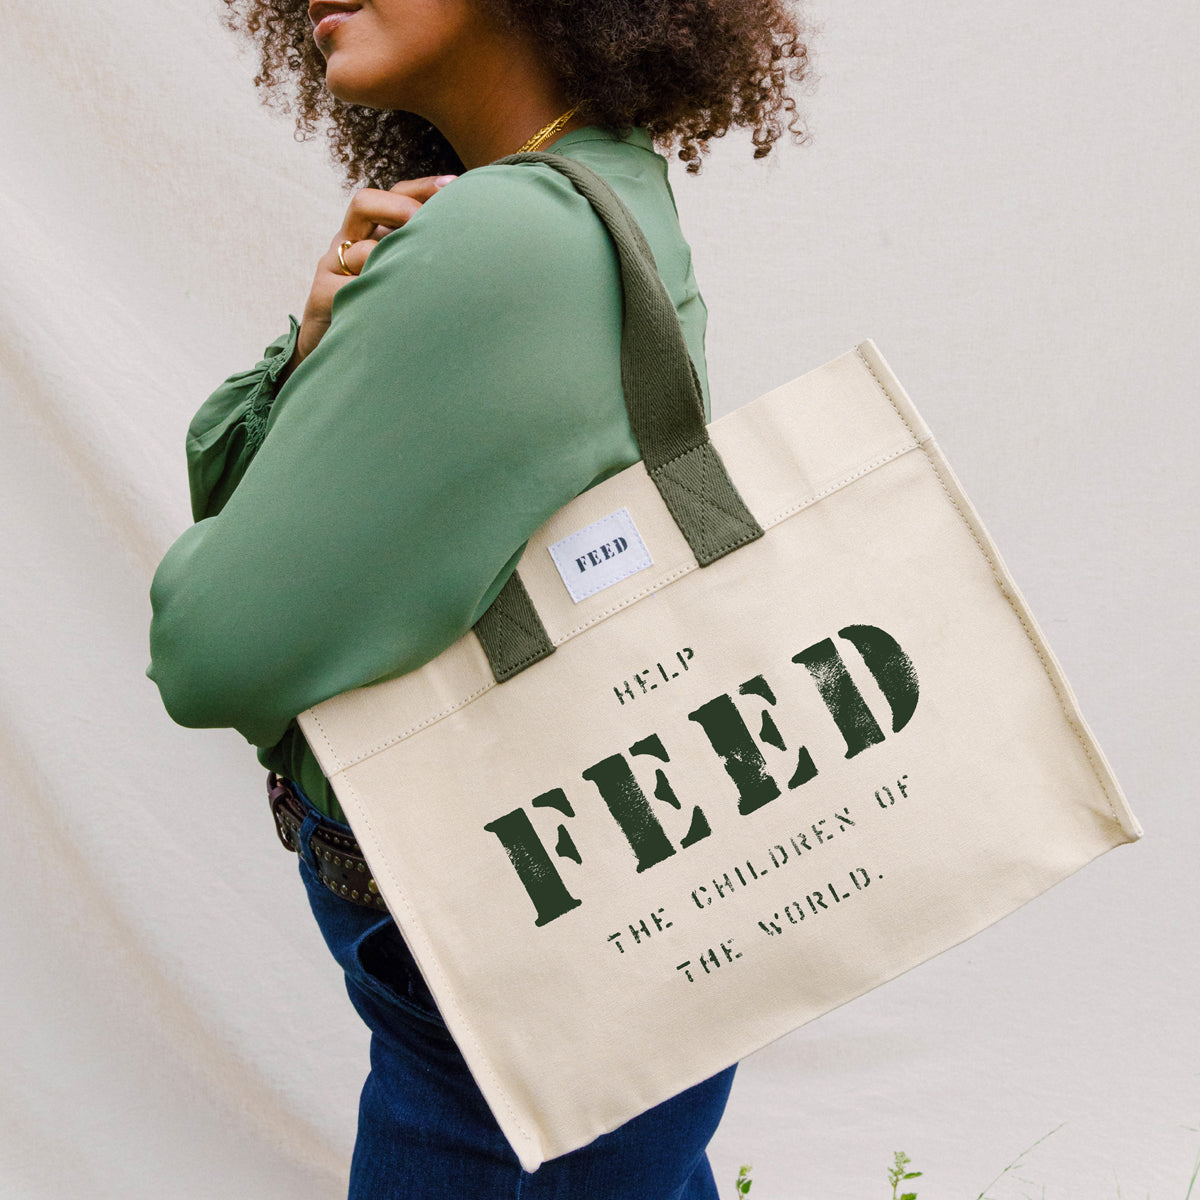 Sand | Lifestyle of sand FEED 10 tote bag with FEED the Children of the World text.